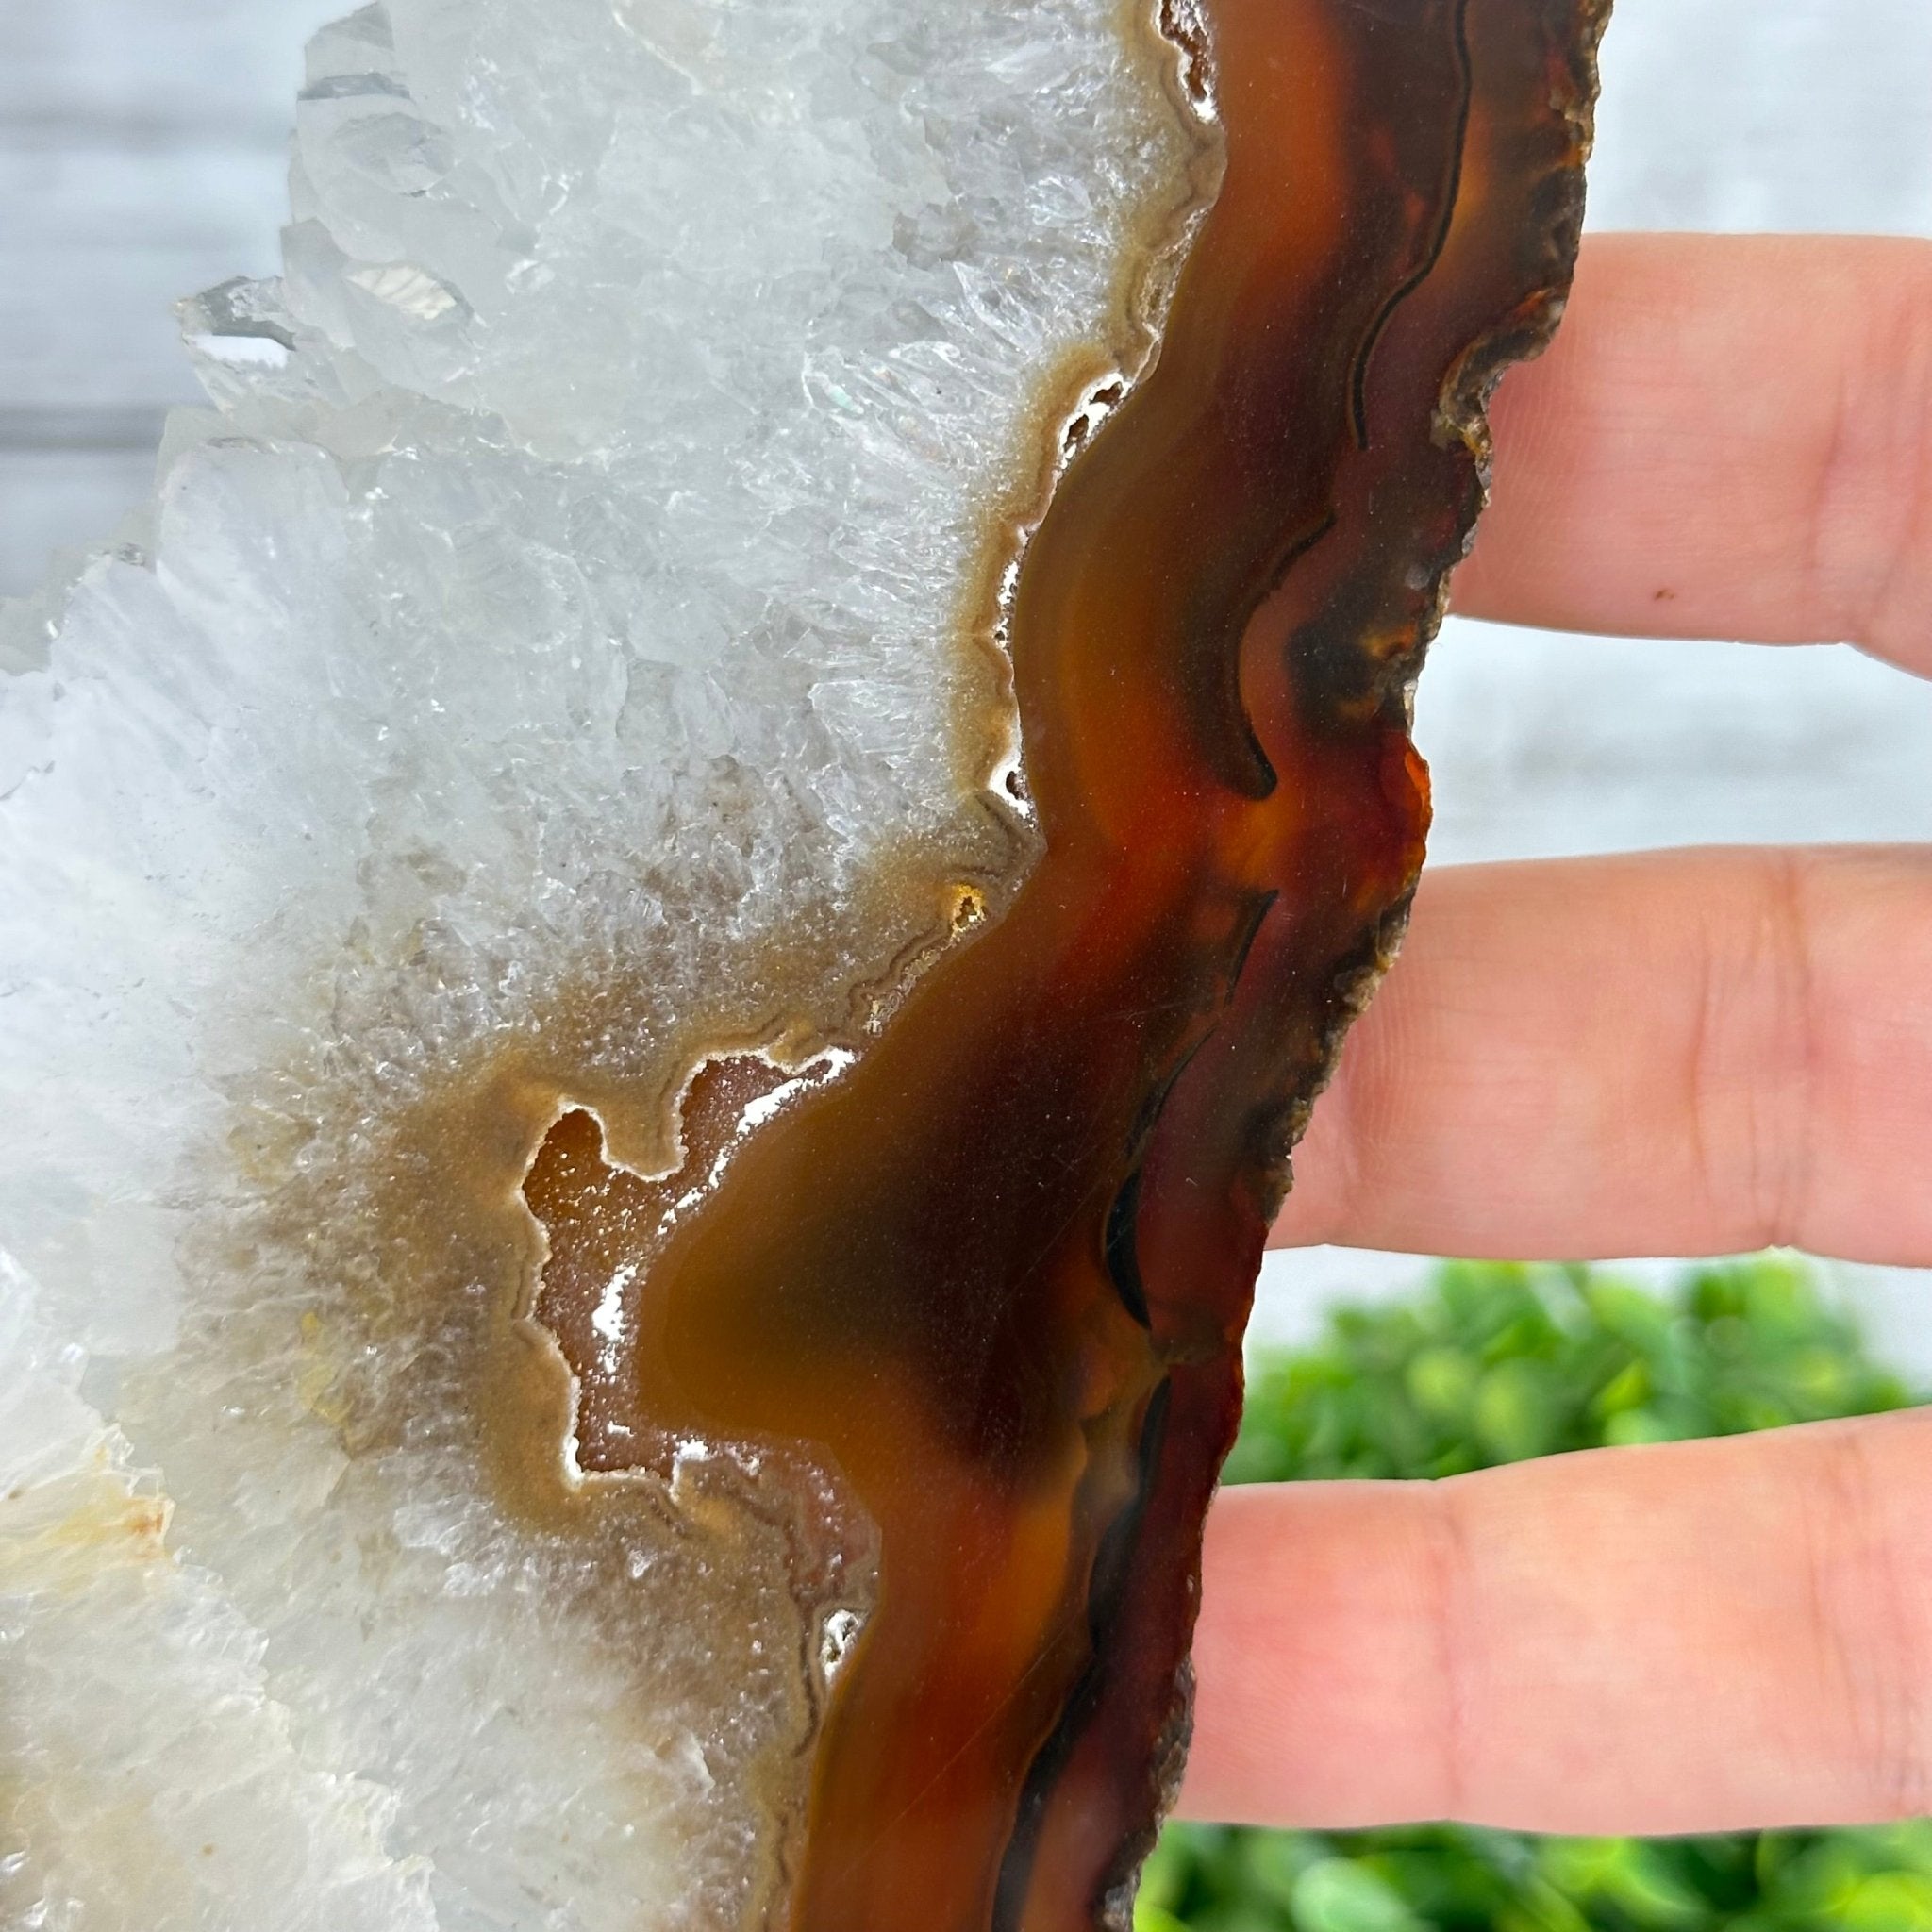 Natural Brazilian Agate "Butterfly Wings", 15" Tall #5050NA-081 - Brazil GemsBrazil GemsNatural Brazilian Agate "Butterfly Wings", 15" Tall #5050NA-081Agate Butterfly Wings5050NA-081